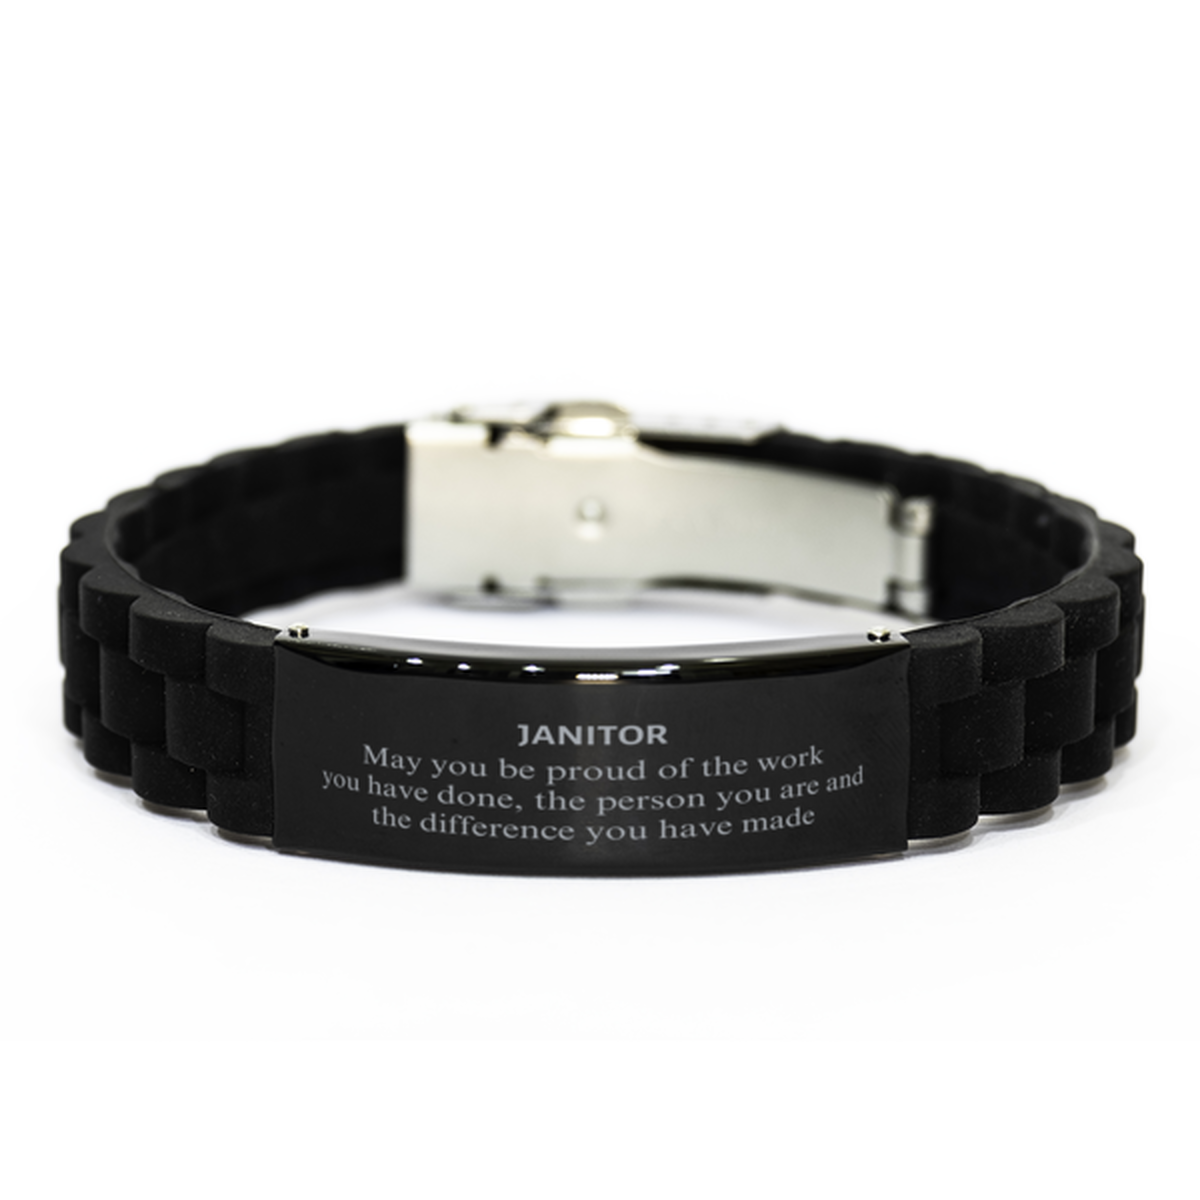 Janitor May you be proud of the work you have done, Retirement Janitor Black Glidelock Clasp Bracelet for Colleague Appreciation Gifts Amazing for Janitor